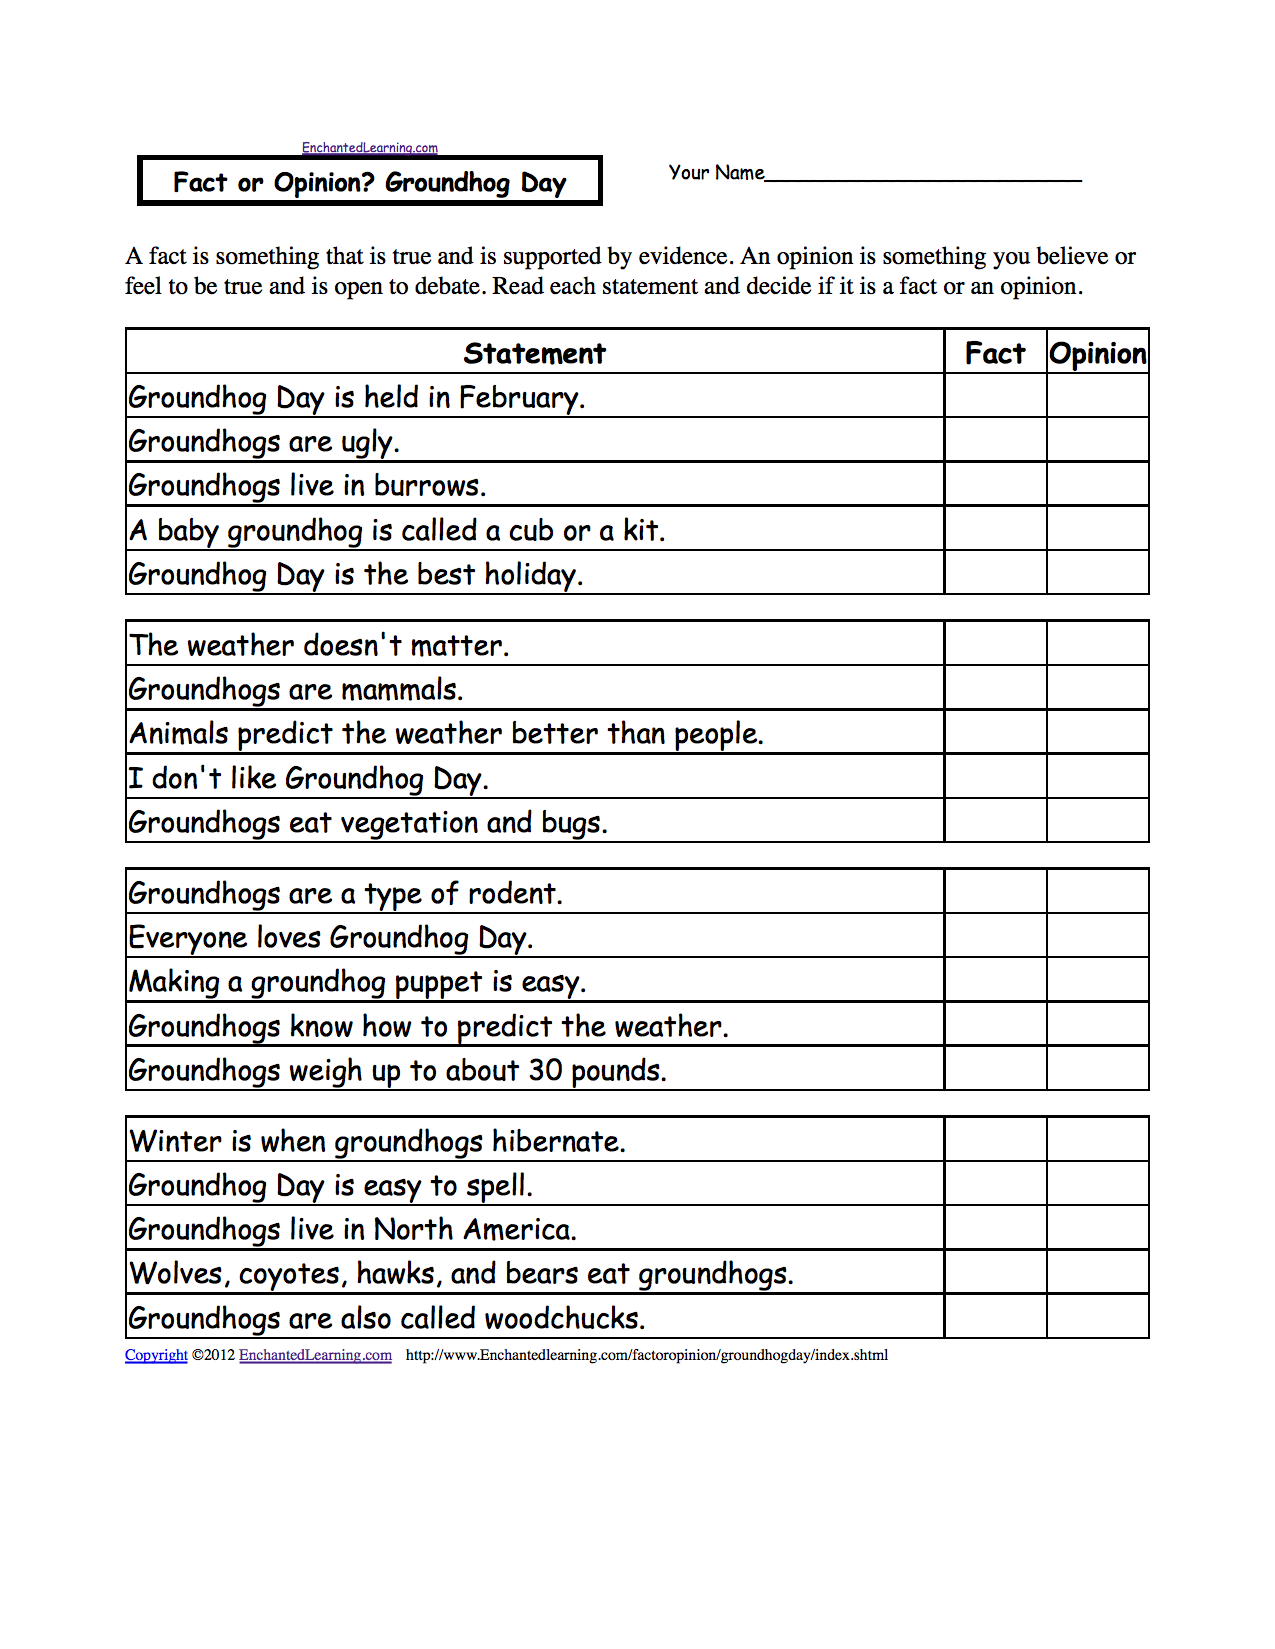 Fact or Opinion? Checkmark Worksheets to Print - EnchantedLearning.com Inside I Feel Statements Worksheet